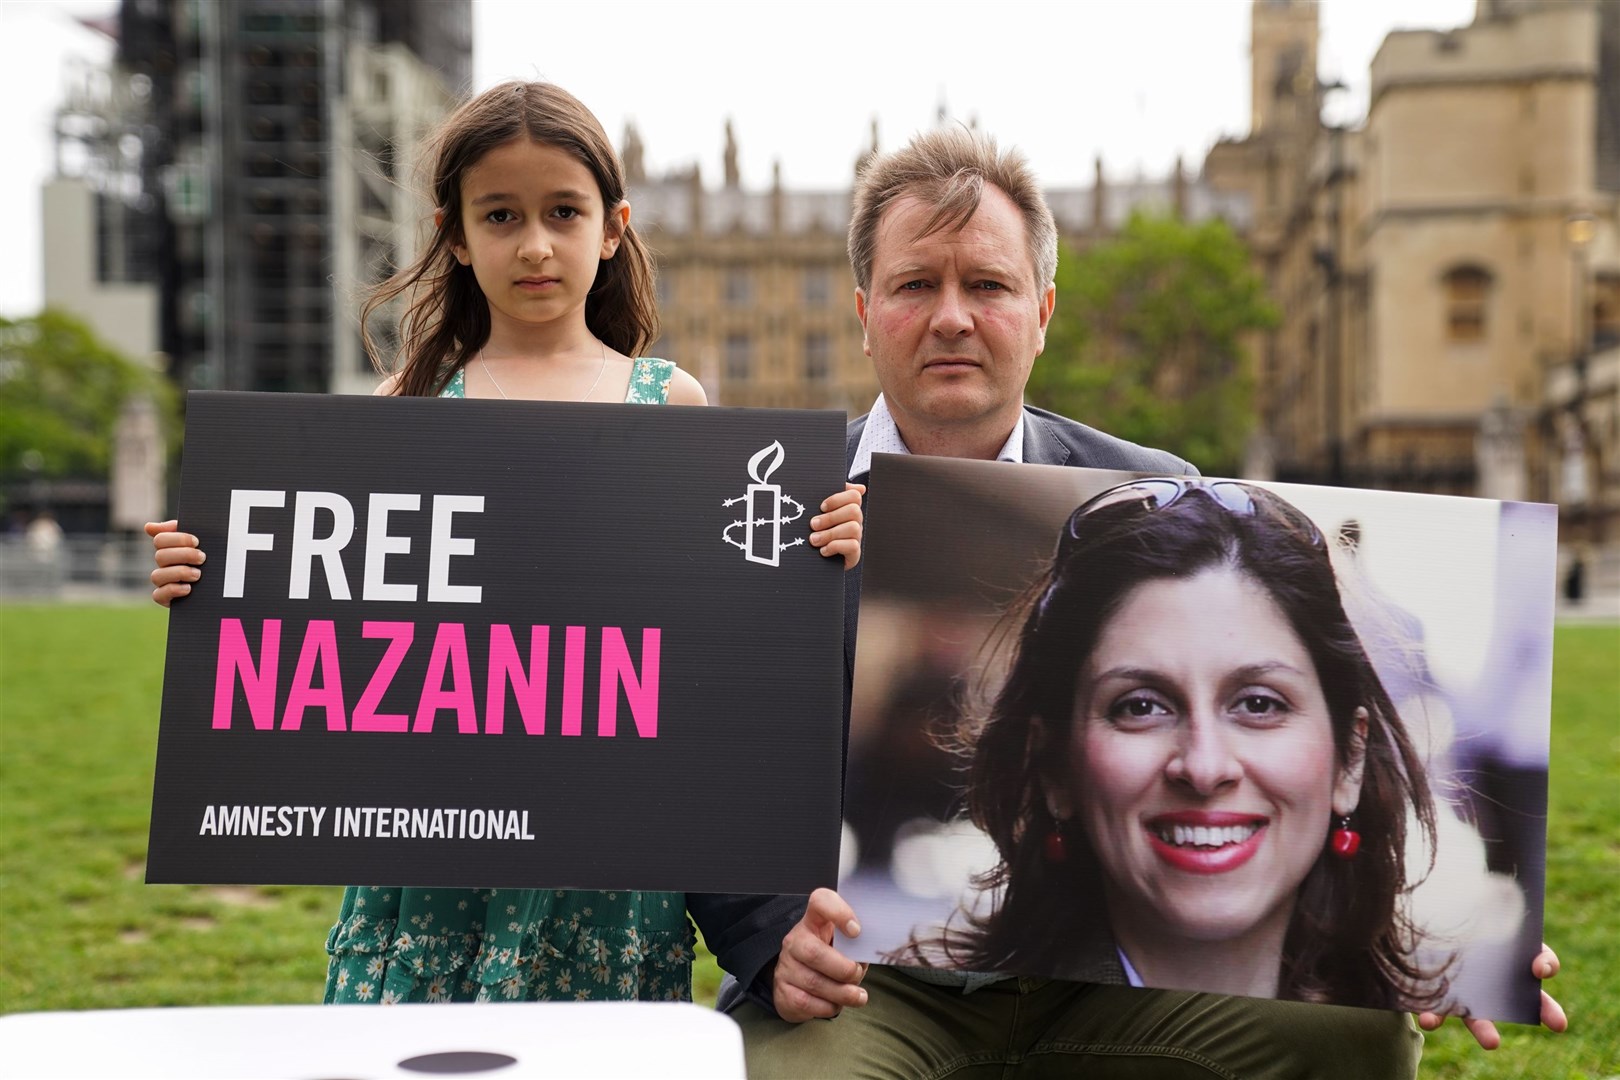 Richard Ratcliffe and his daughter Gabriella hold signs in Parliament Square in September to mark the 2,000th day Nazanin Zaghari-Ratcliffe has been detained in Iran (Kirsty O’Connor/PA)